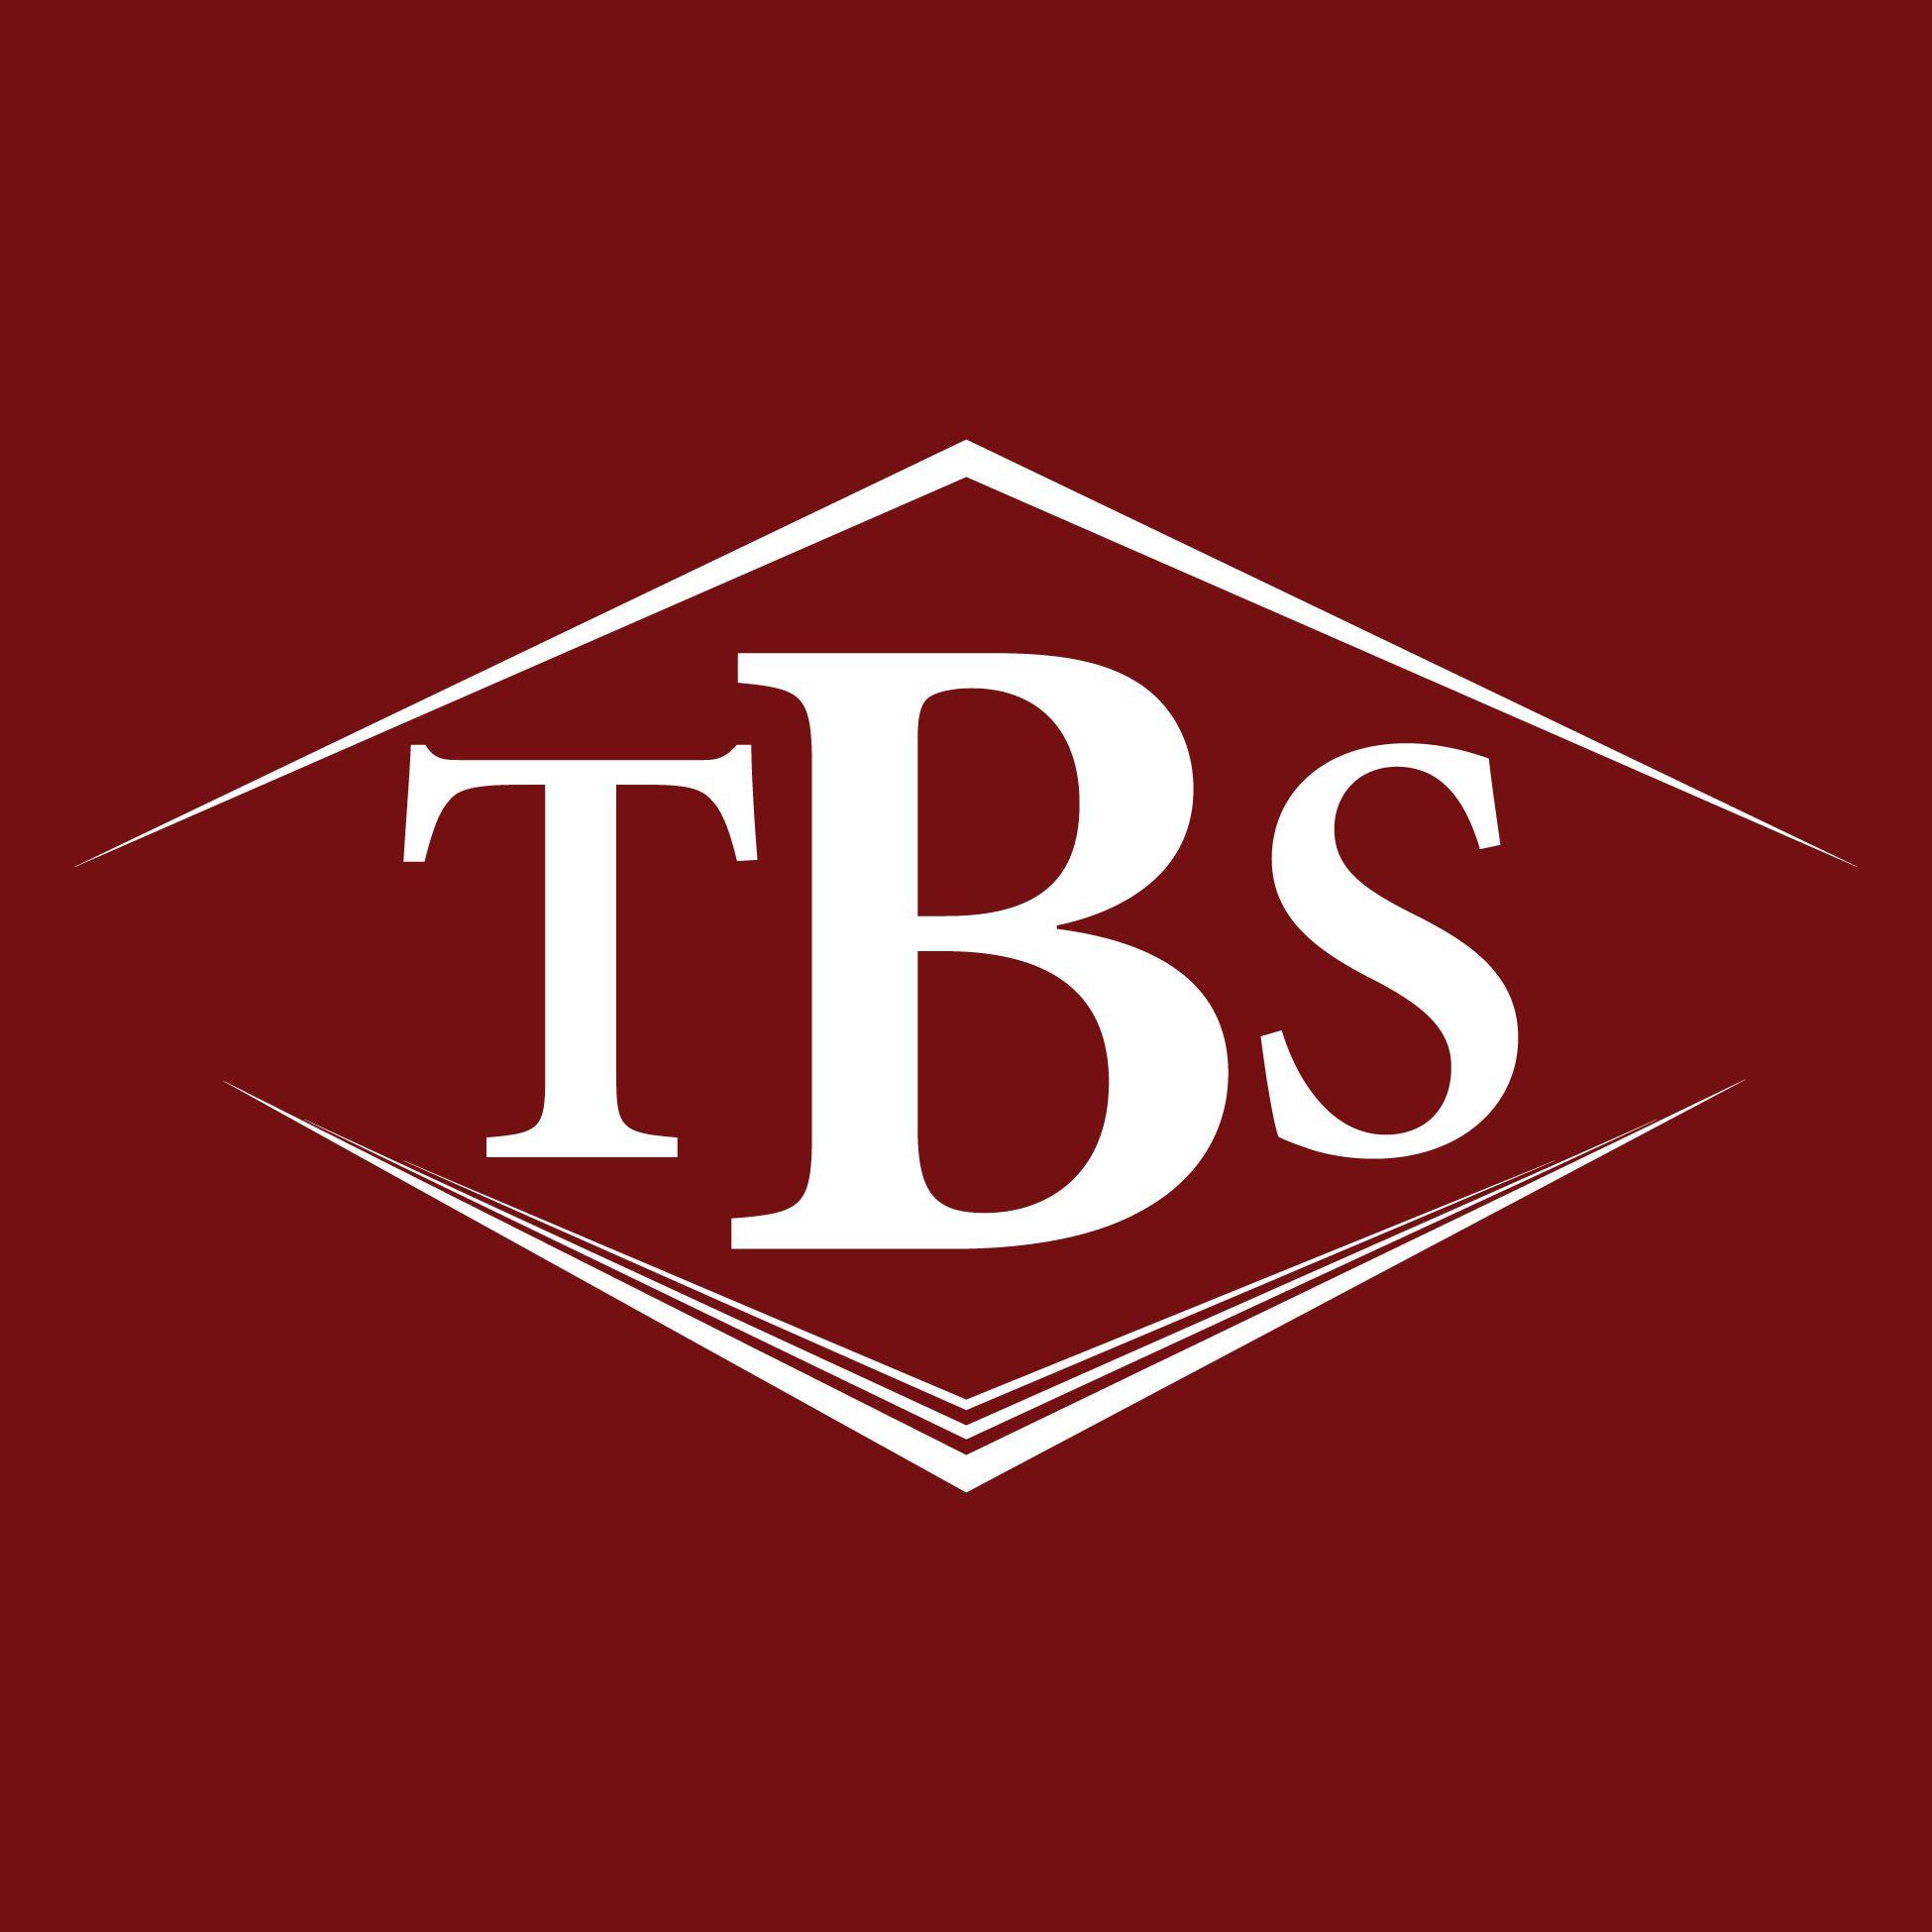 TBS Logo - Documents and Files Bible Seminary